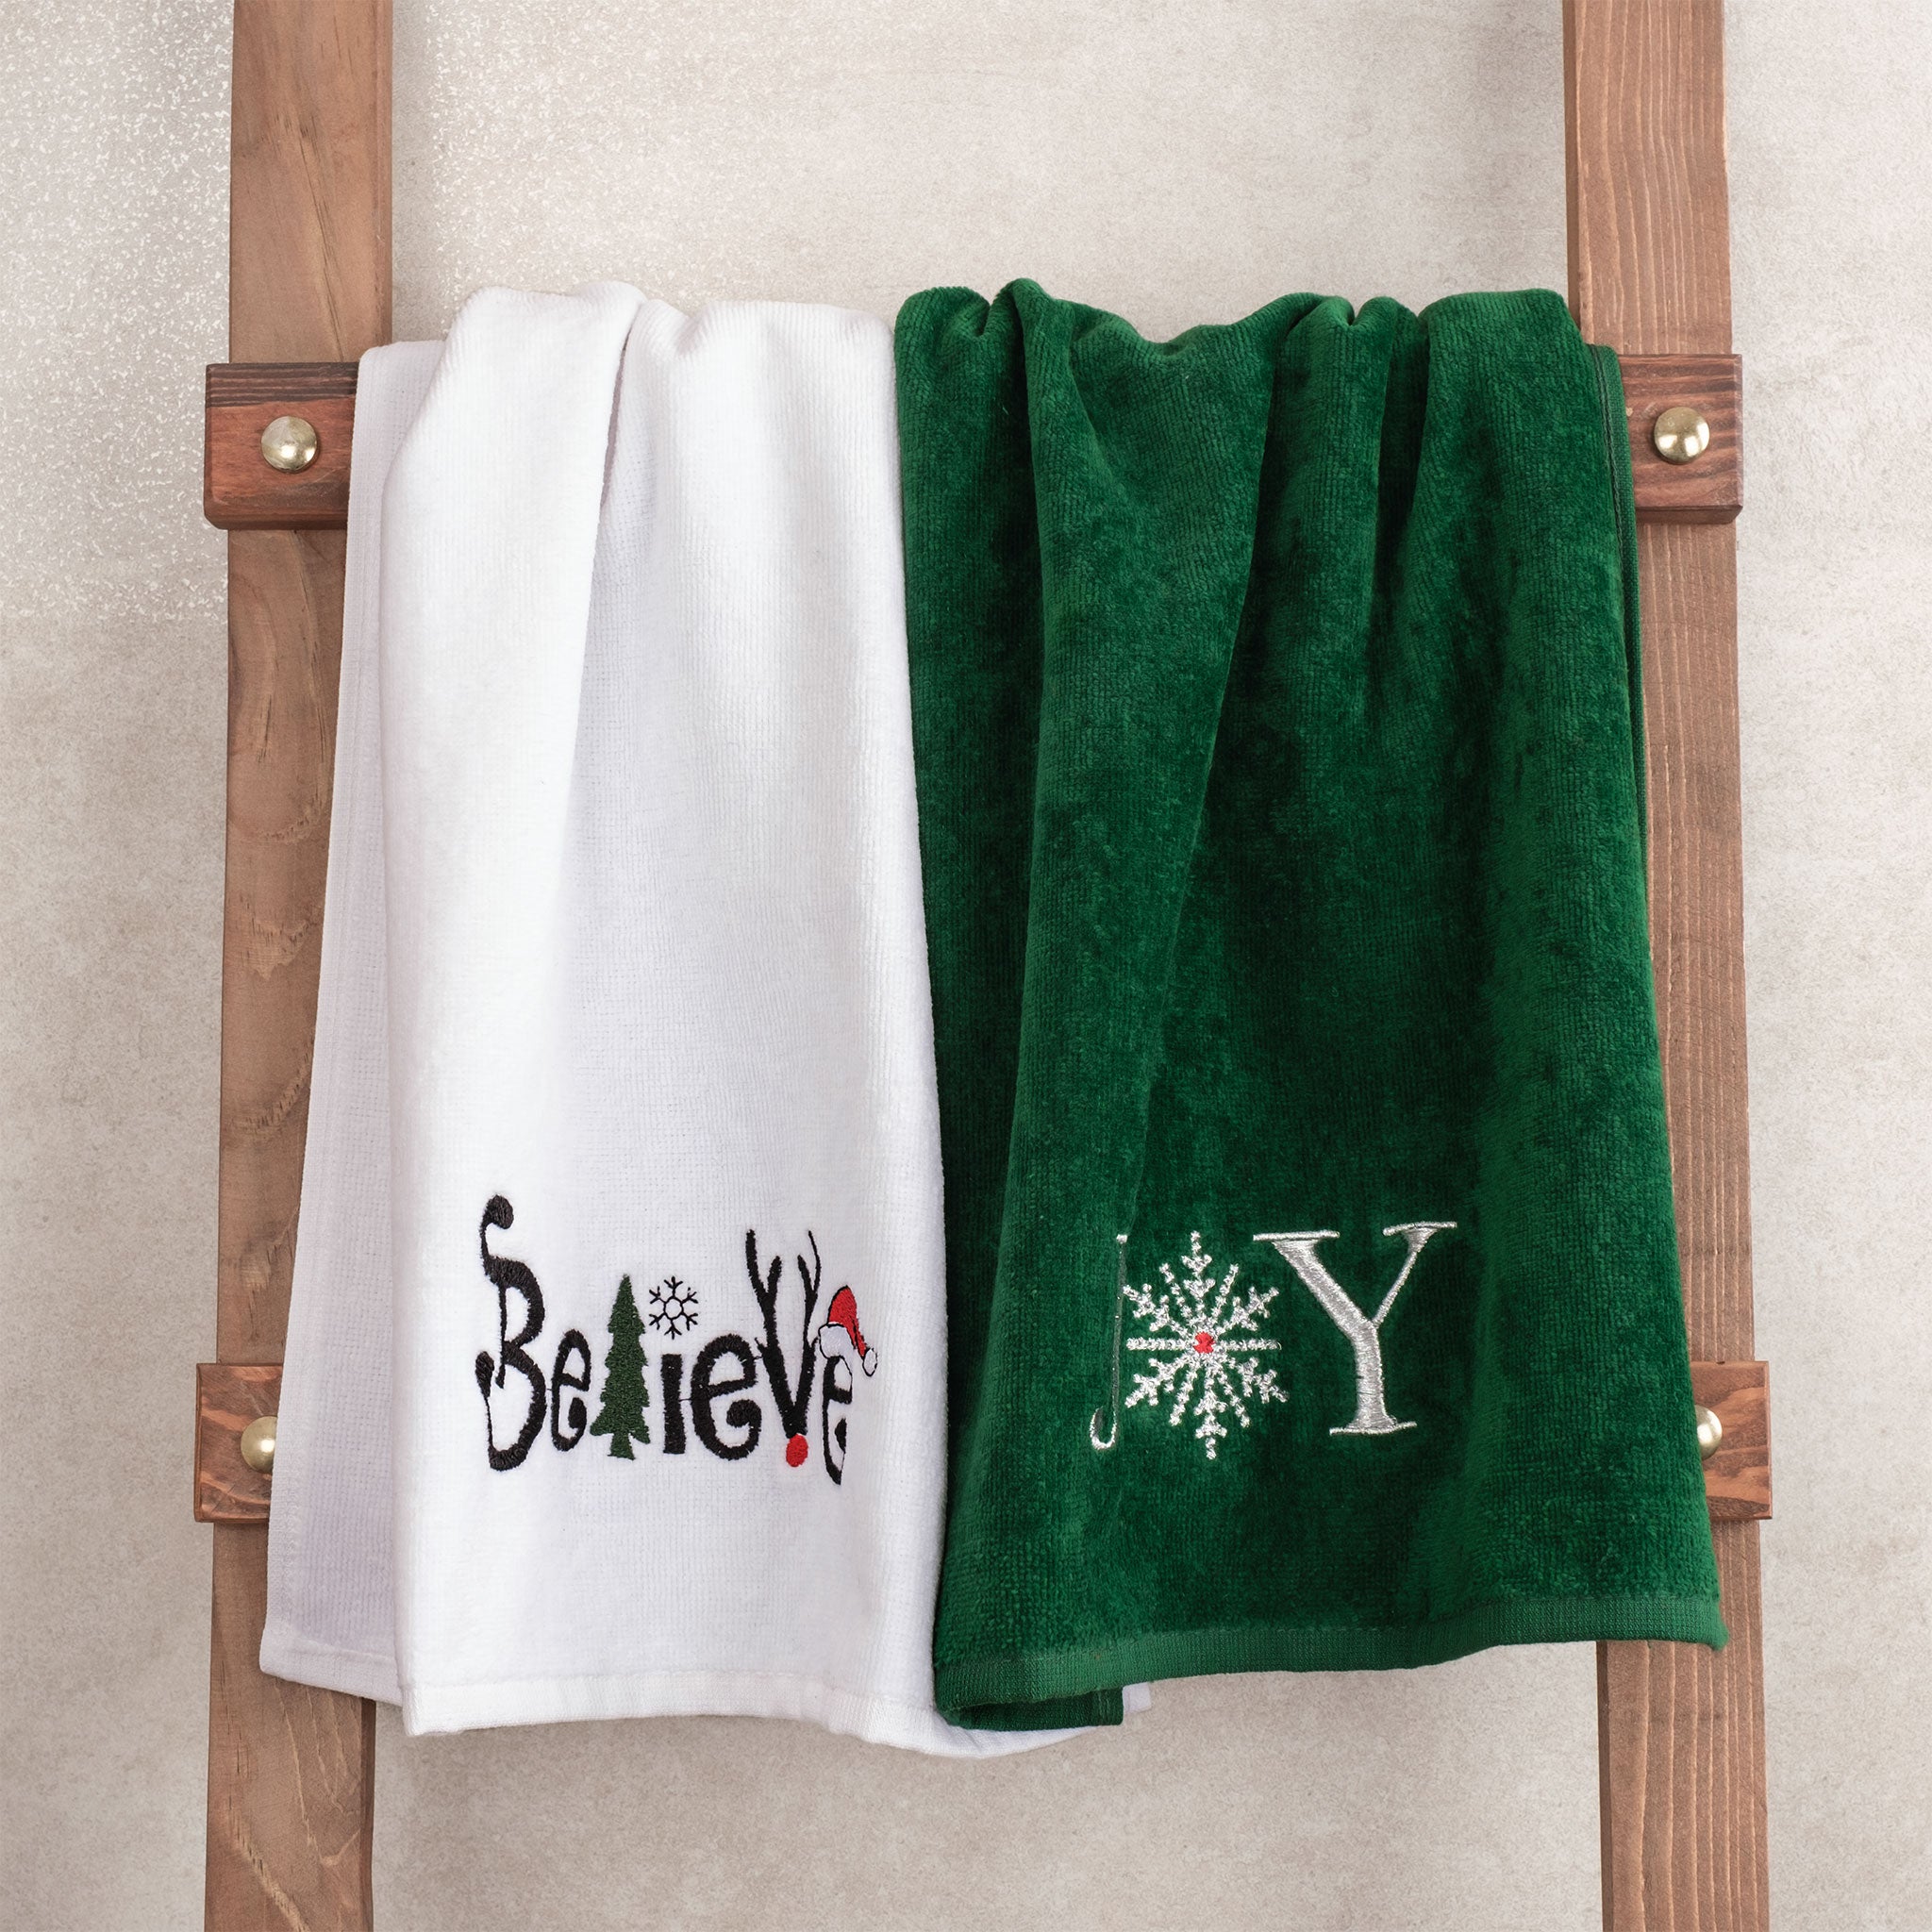 American Soft Linen Christmas Towels Bathroom Set, 2 Packed